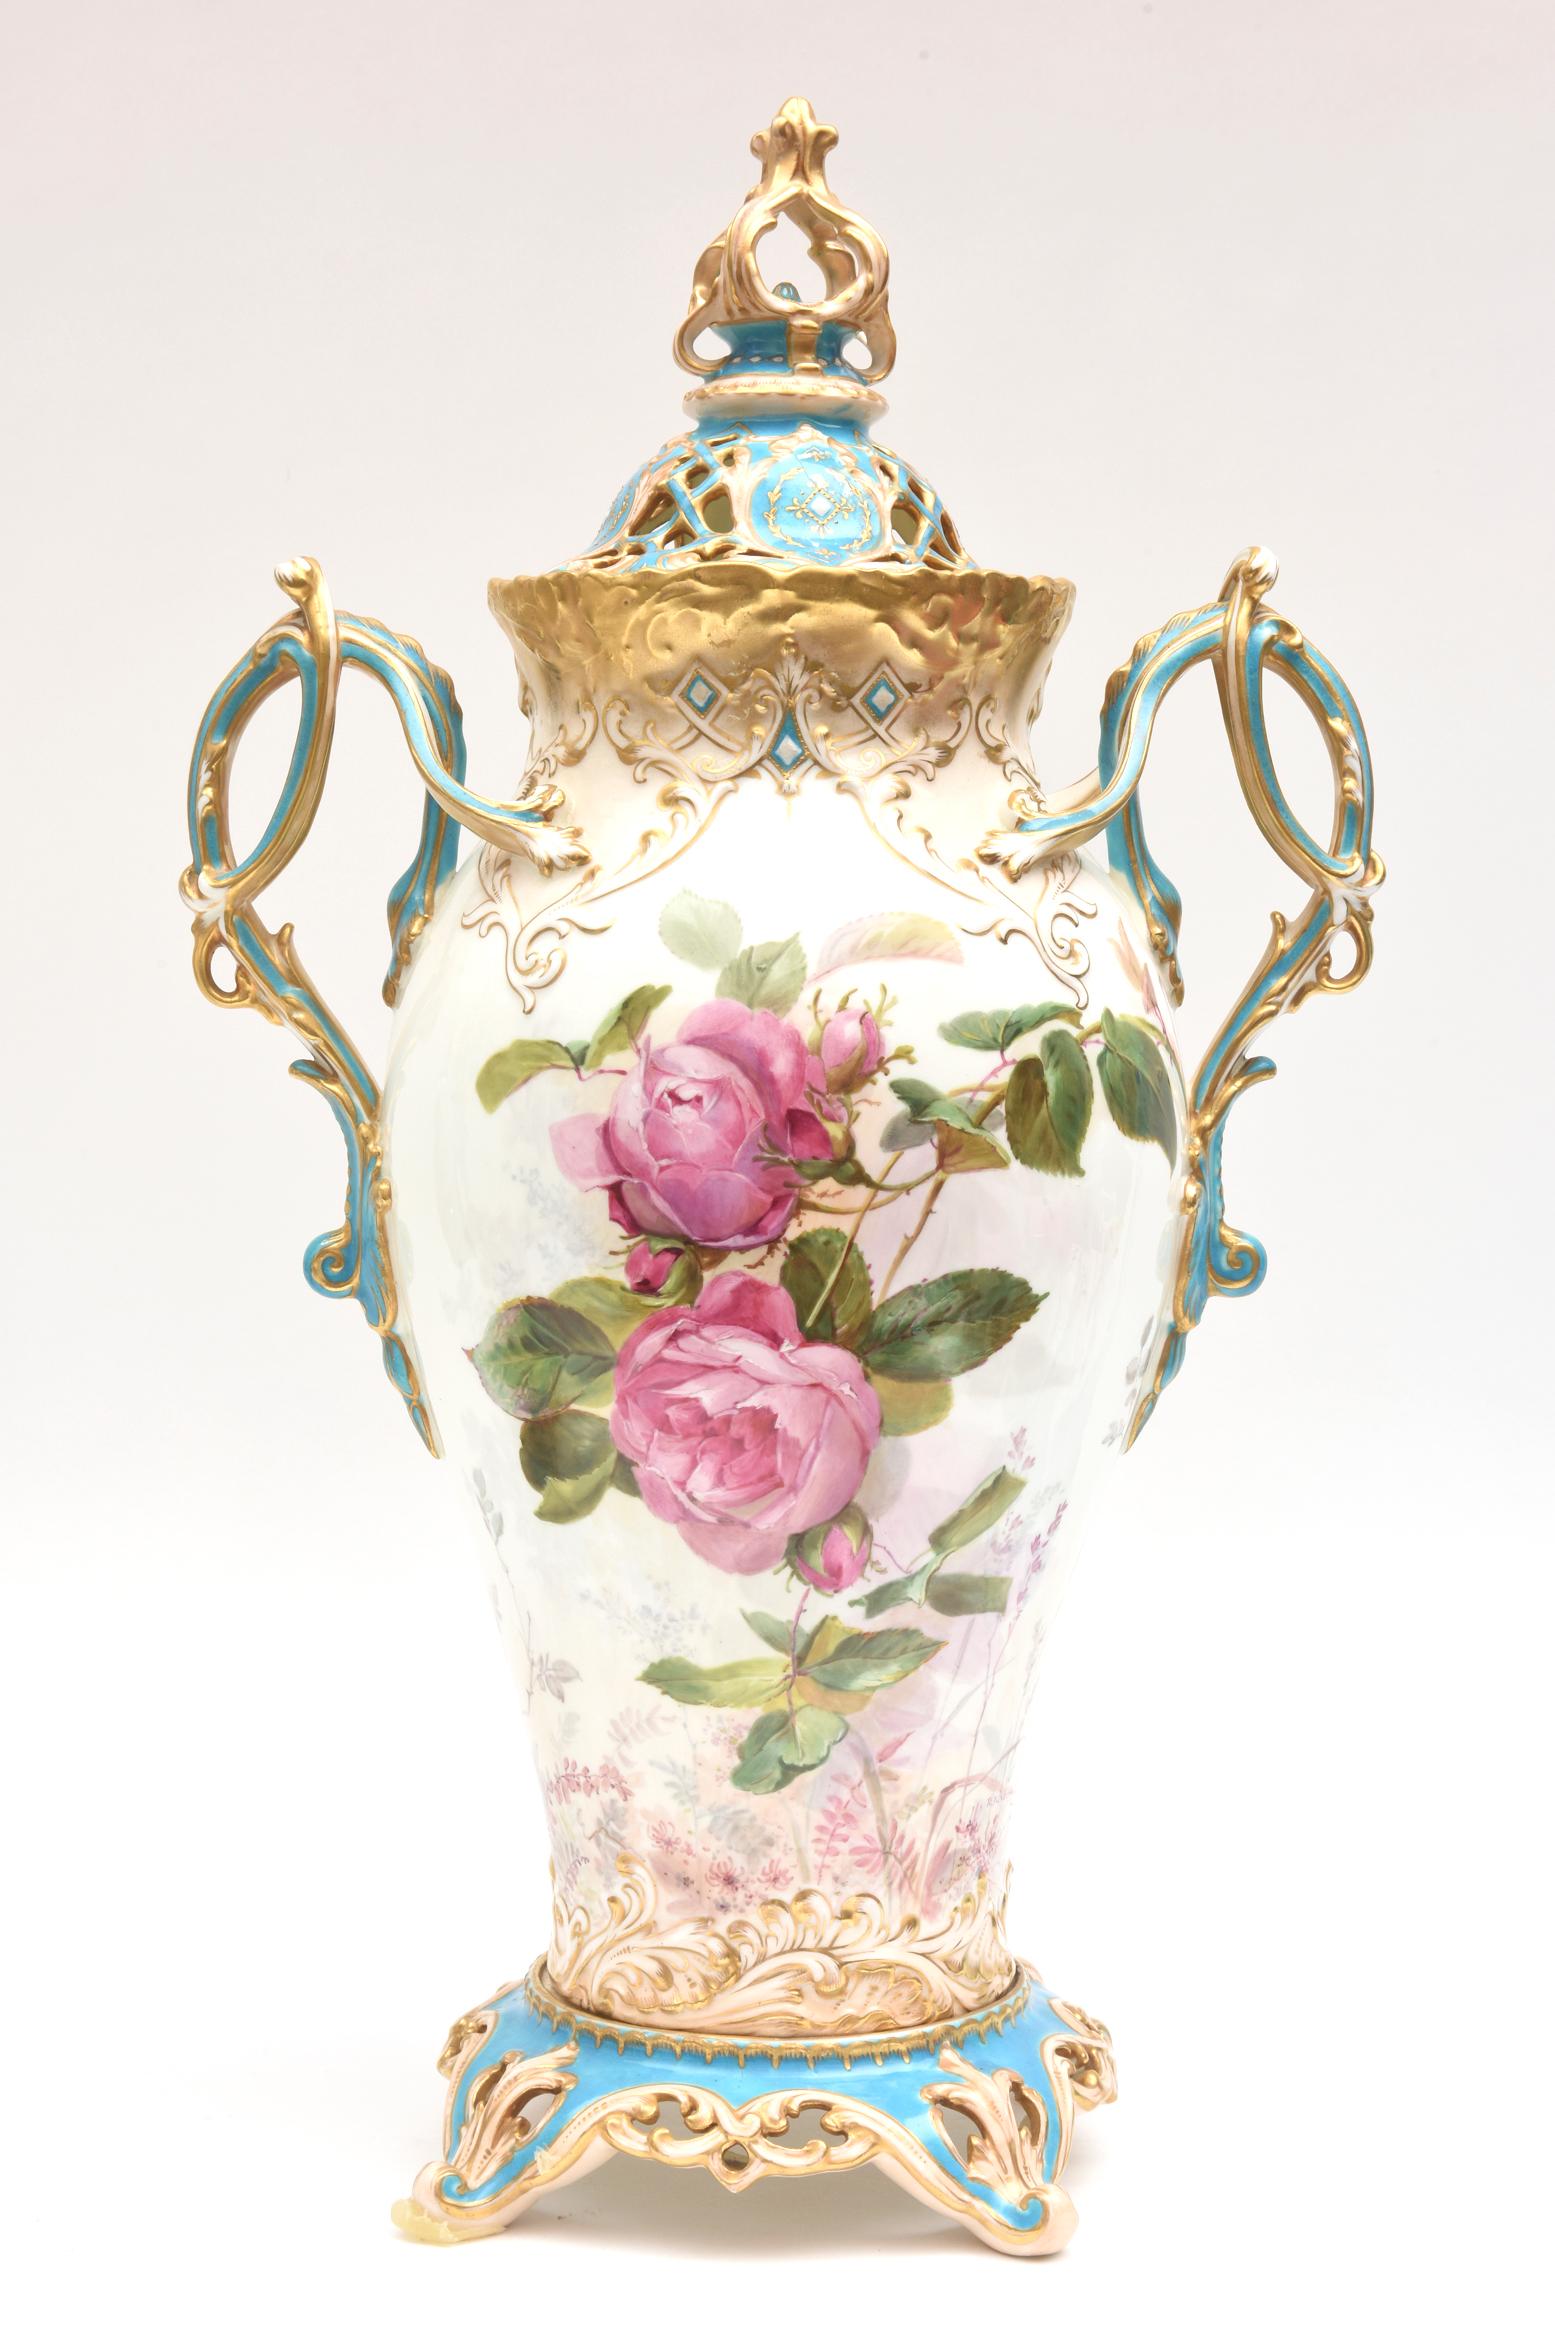 19th Century English Covered Vases, Vibrant Turquoise, Exquisitely Crafted, Pair 3